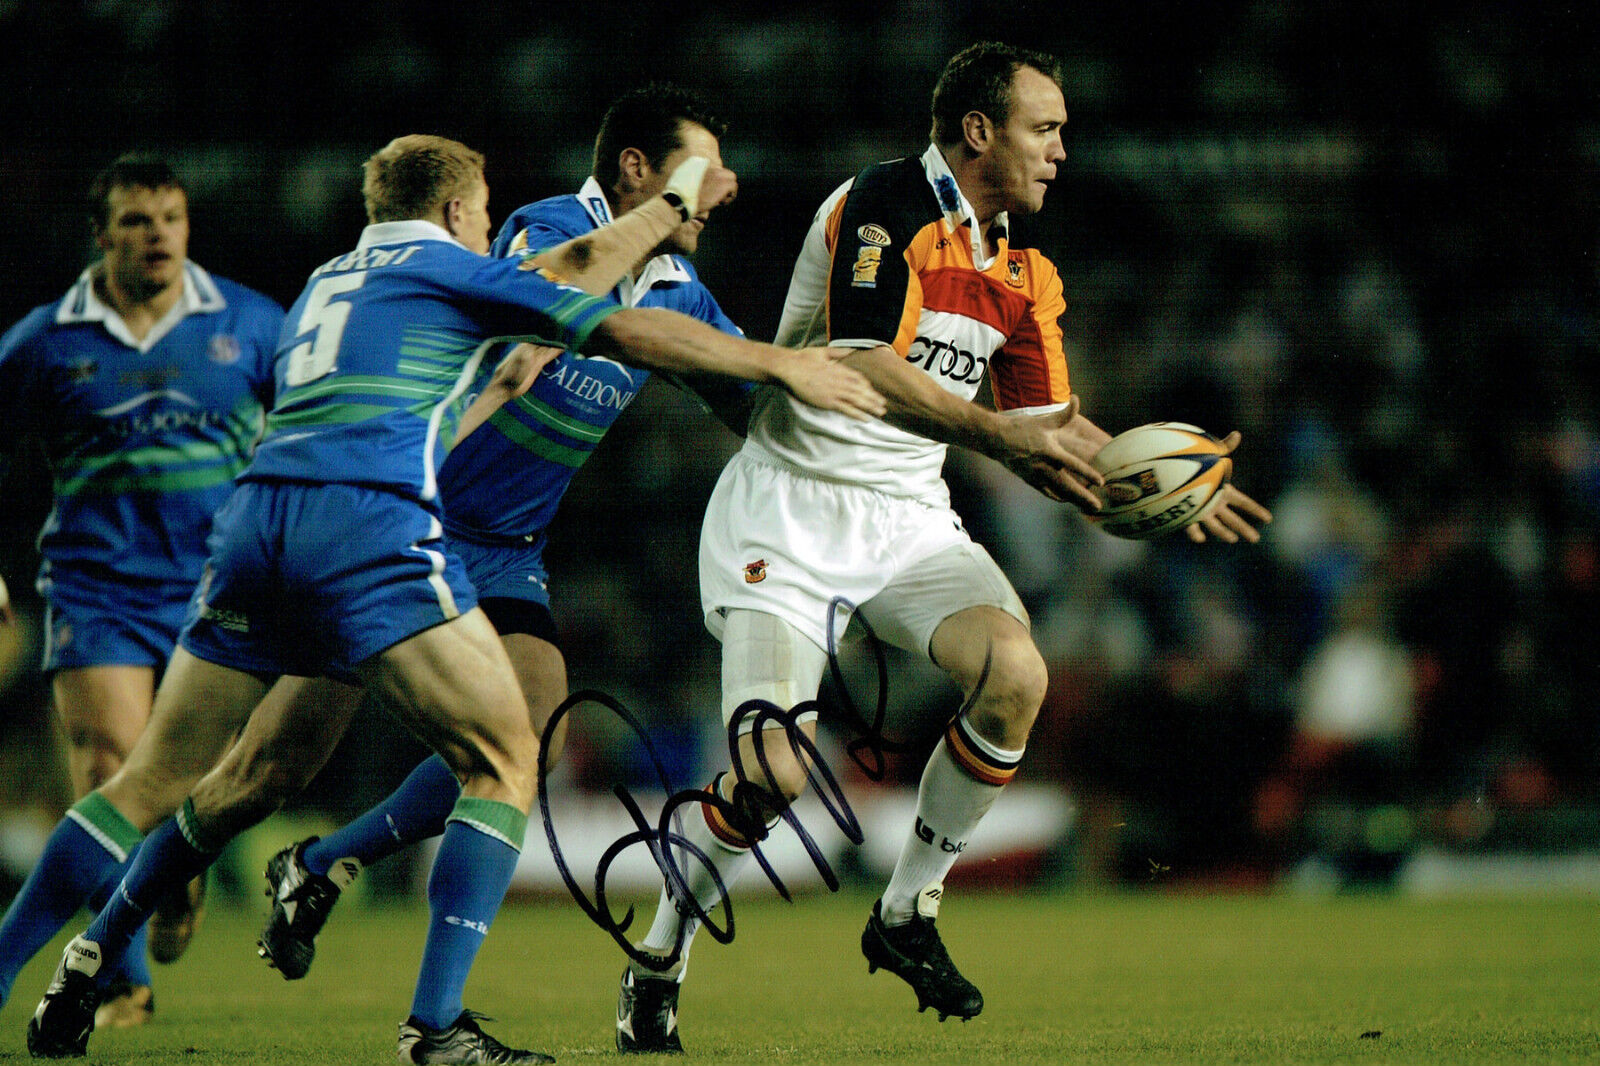 Brian McDERMOTT Bradford Rugby League Signed Autograph 12x8 Photo Poster painting AFTAL COA